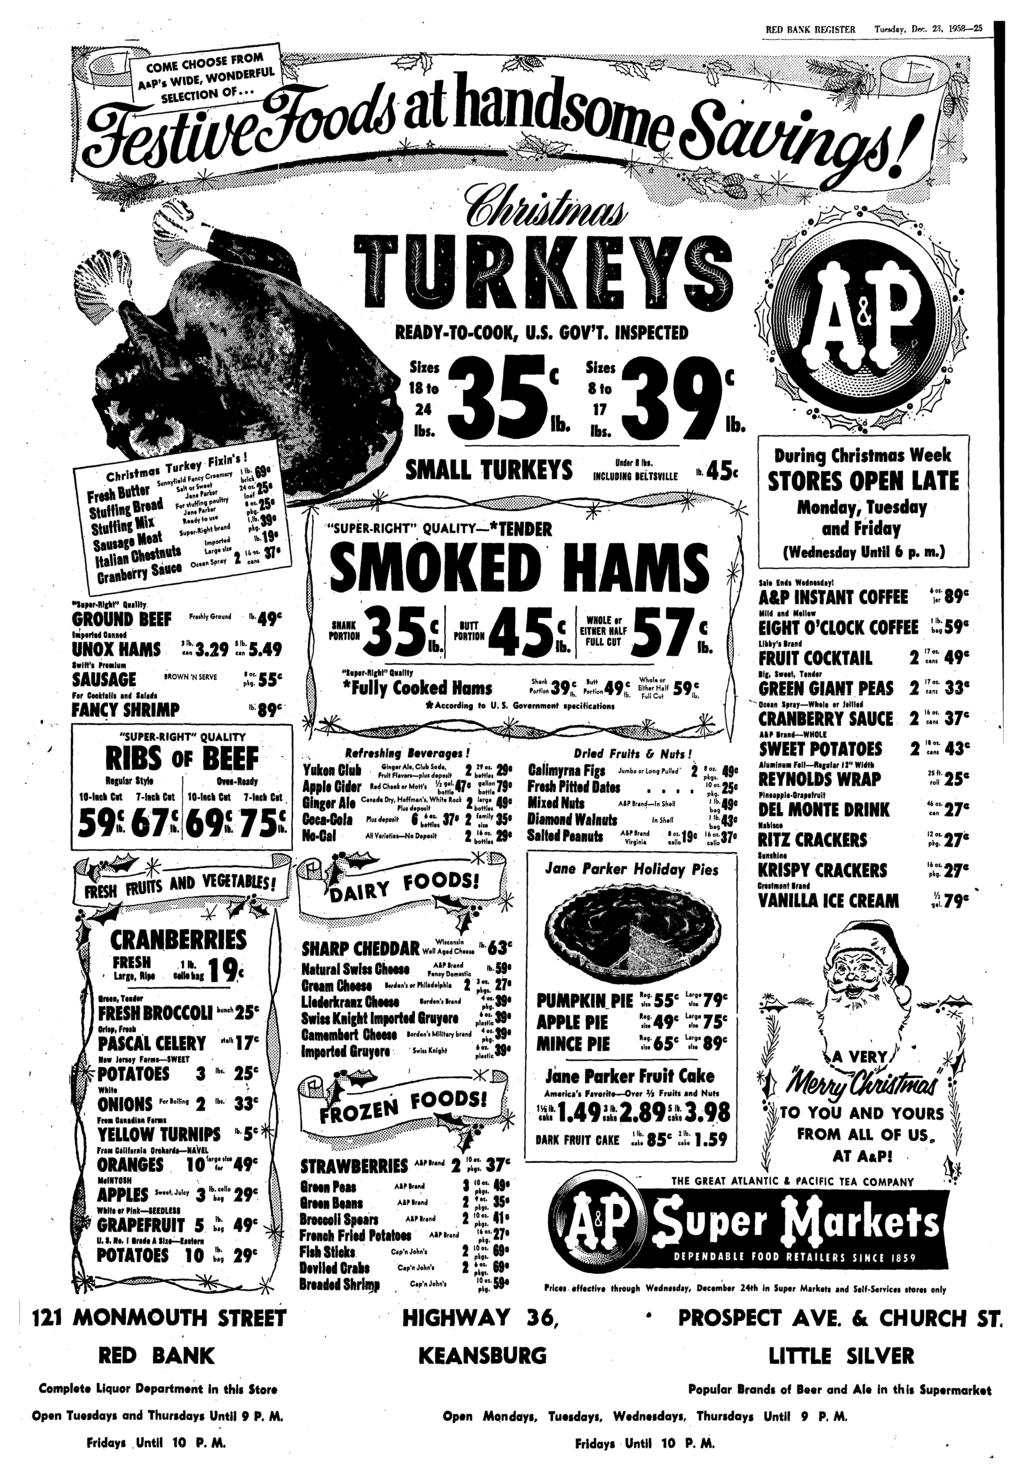 f REGISTER Tuesday, Dec. 23, 1958-25 *: PP* 1 ** "" ". "'" " - ^1F READY-TO-COOK, U.S. GOV'T. INSPECTED C ^ '06 "SipHlliM" Qiallty GROUND BEEF -*--" b 49 e tapsrtsd Csnnsd UNOXHAMS 3.29 "5.